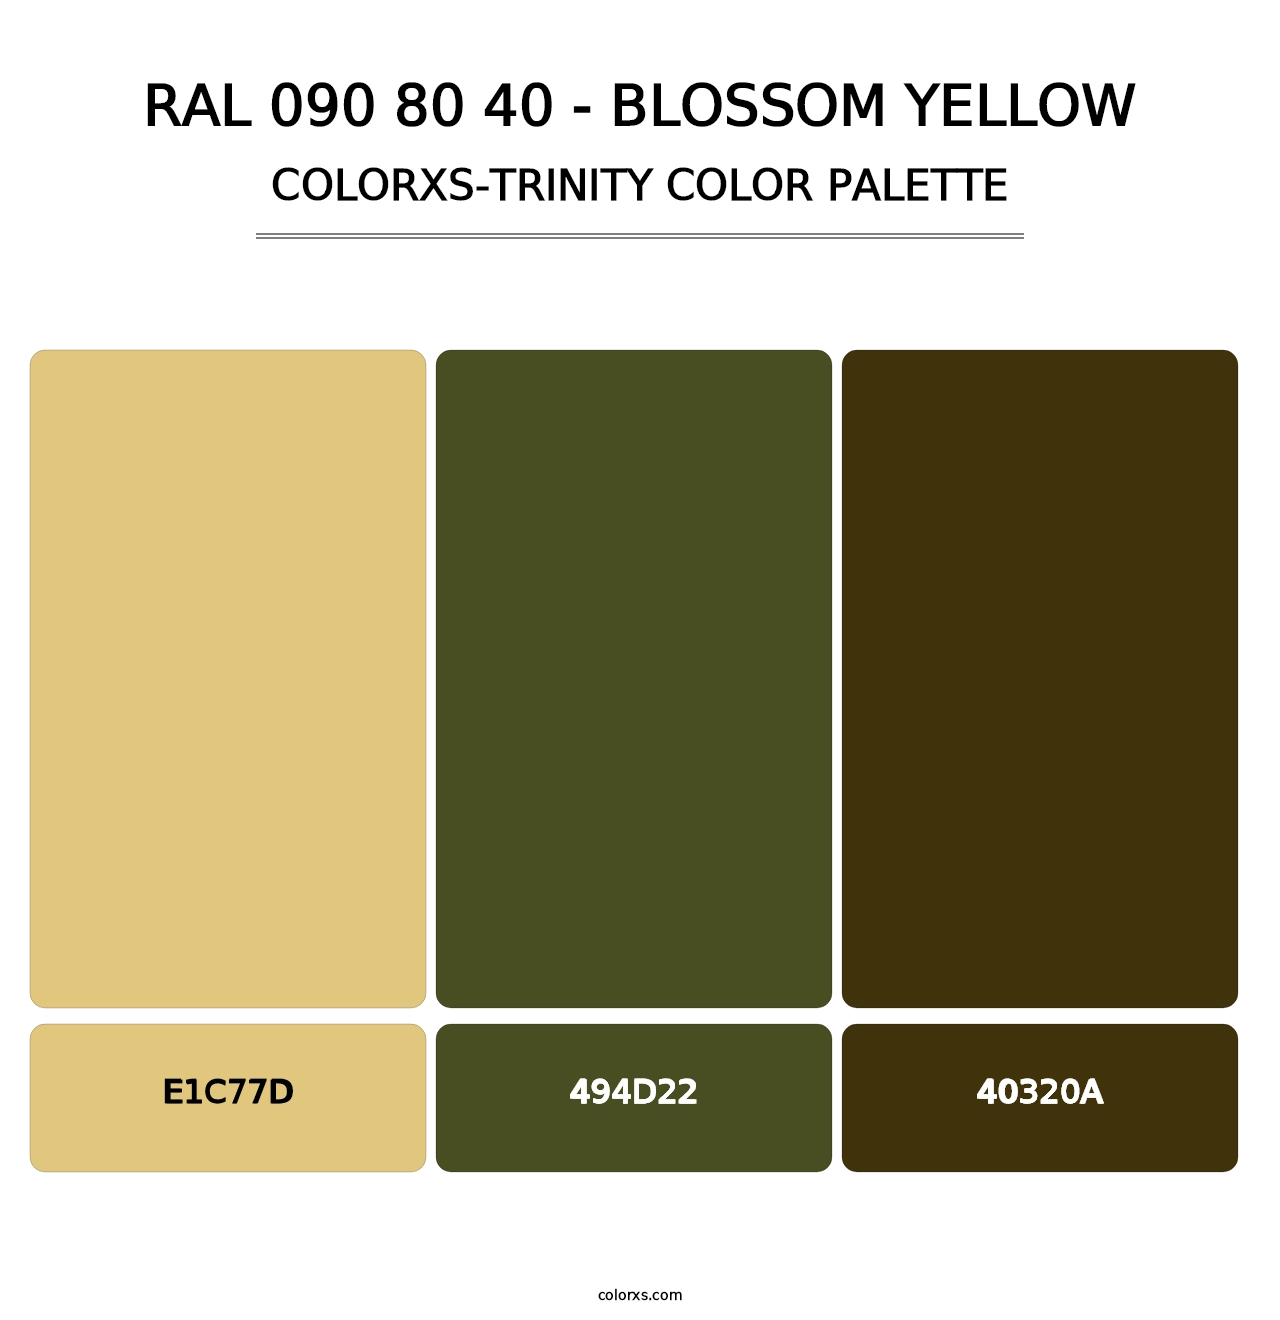 RAL 090 80 40 - Blossom Yellow - Colorxs Trinity Palette